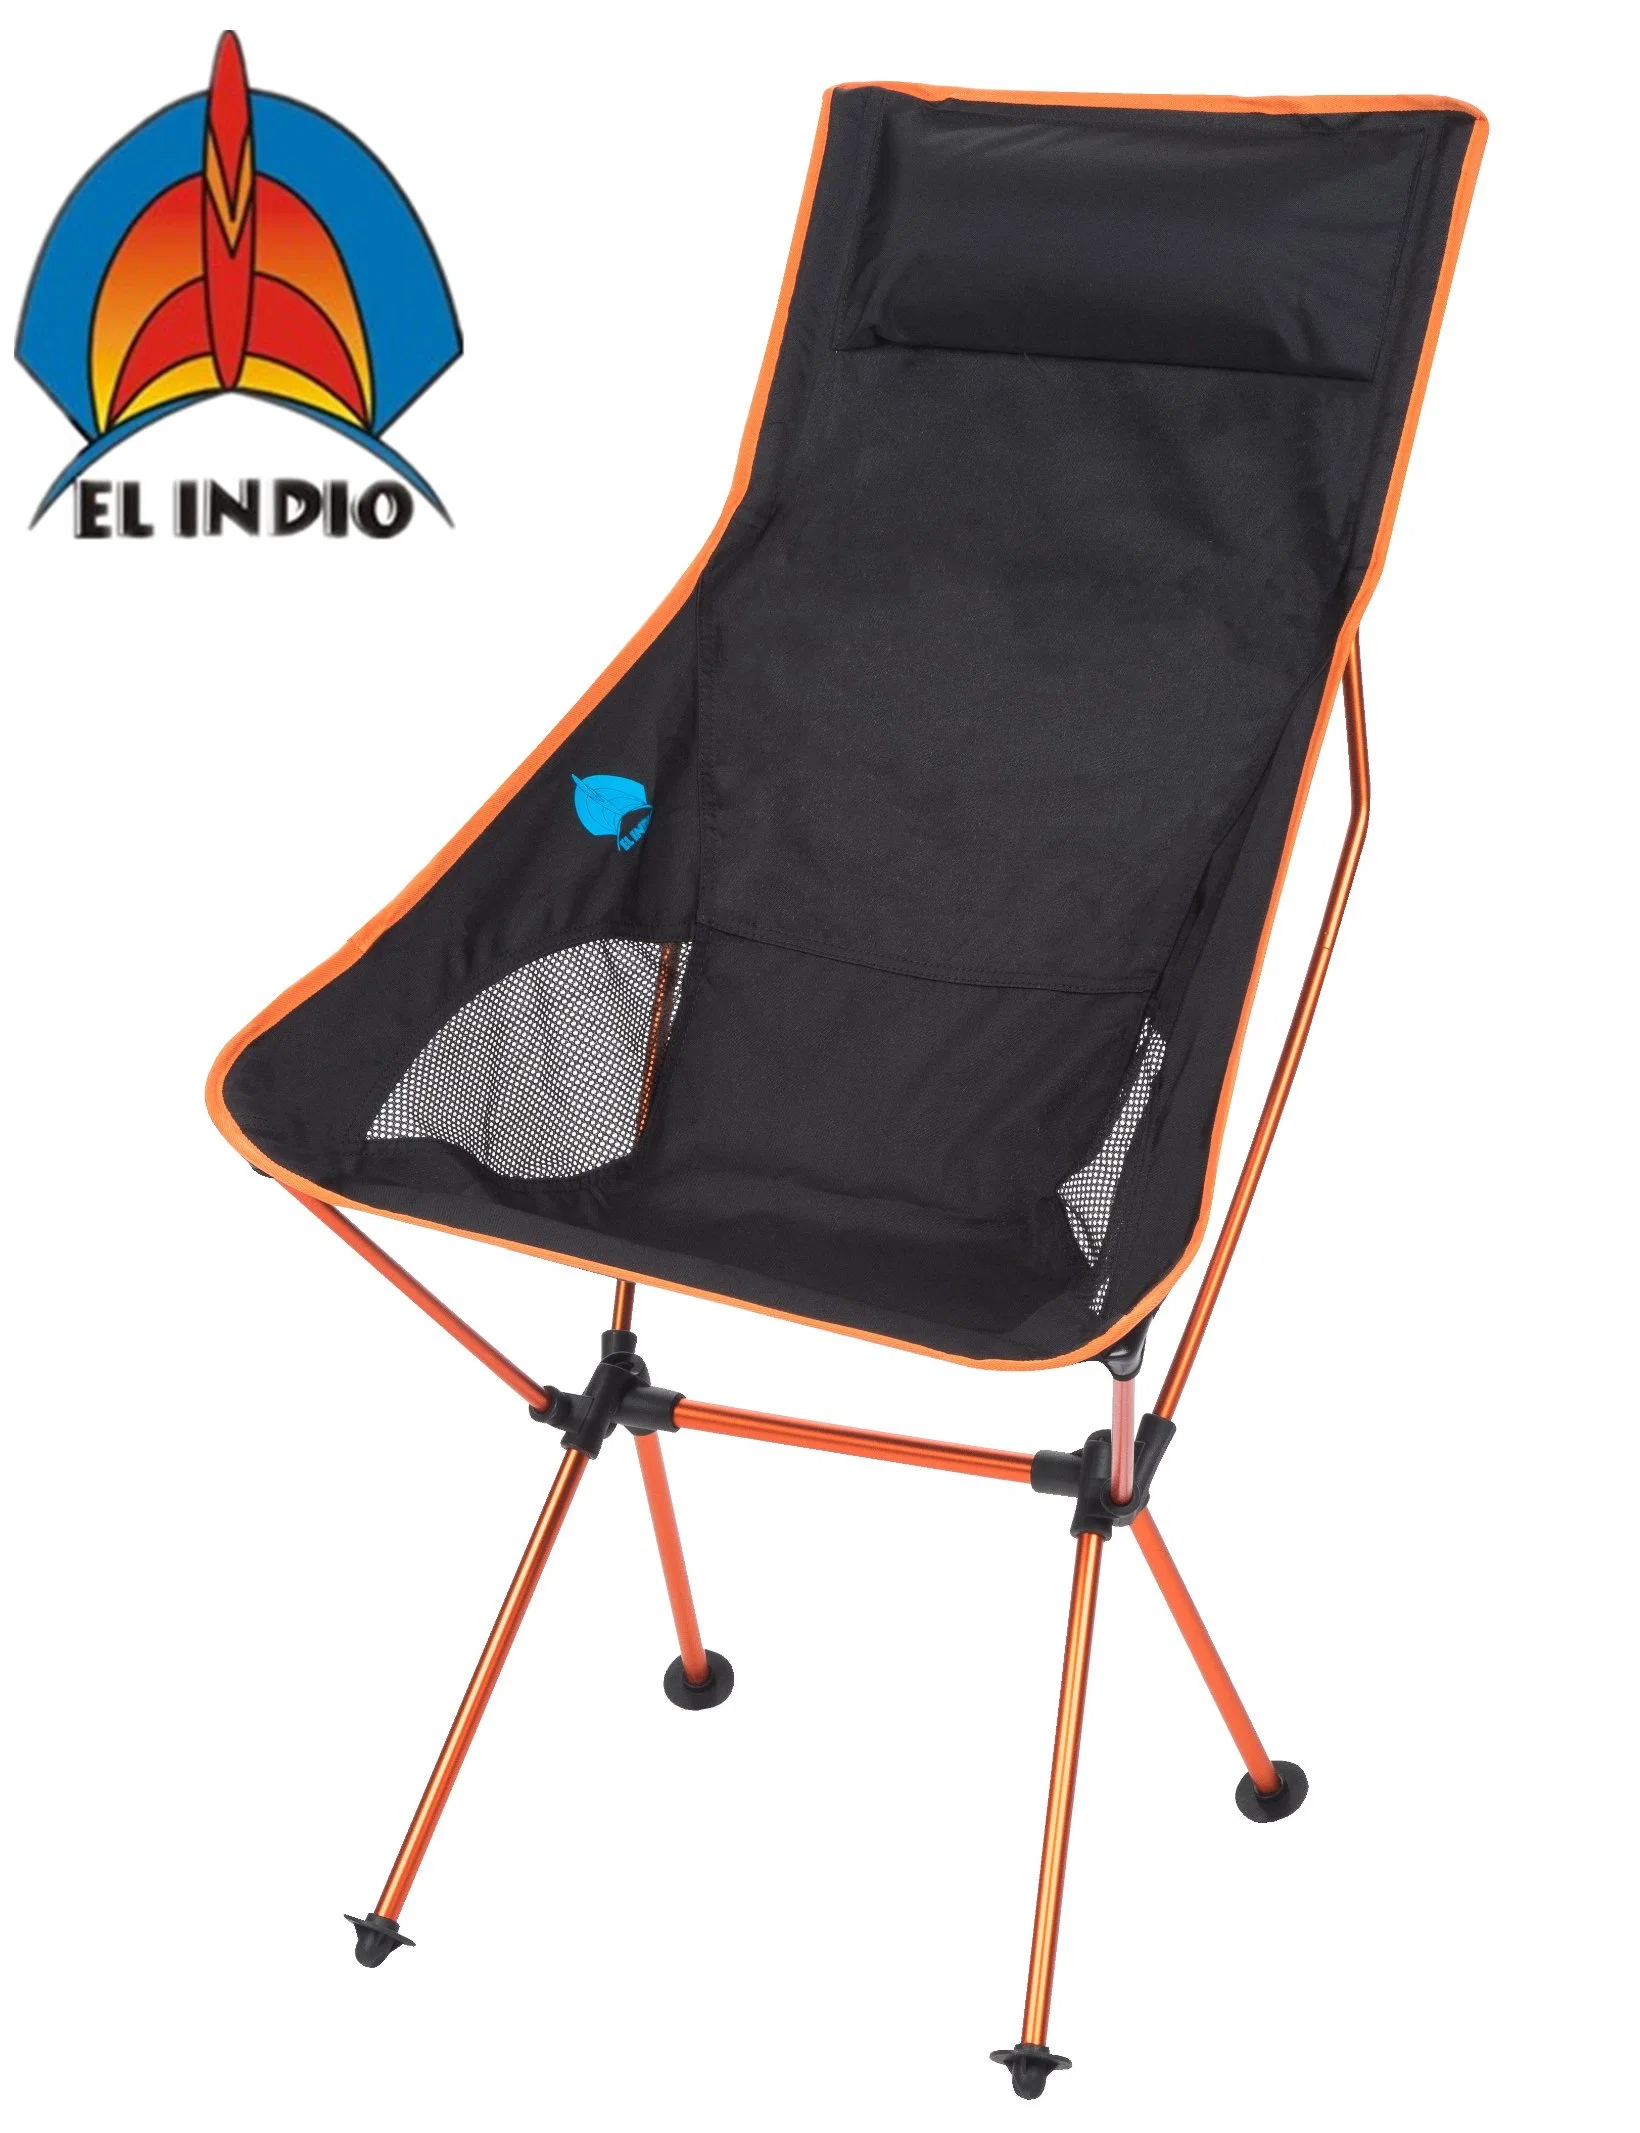 Fishing Folding Camping Chairs Lightweight Outdoor Hiking Lounger BBQ Picnic Chair